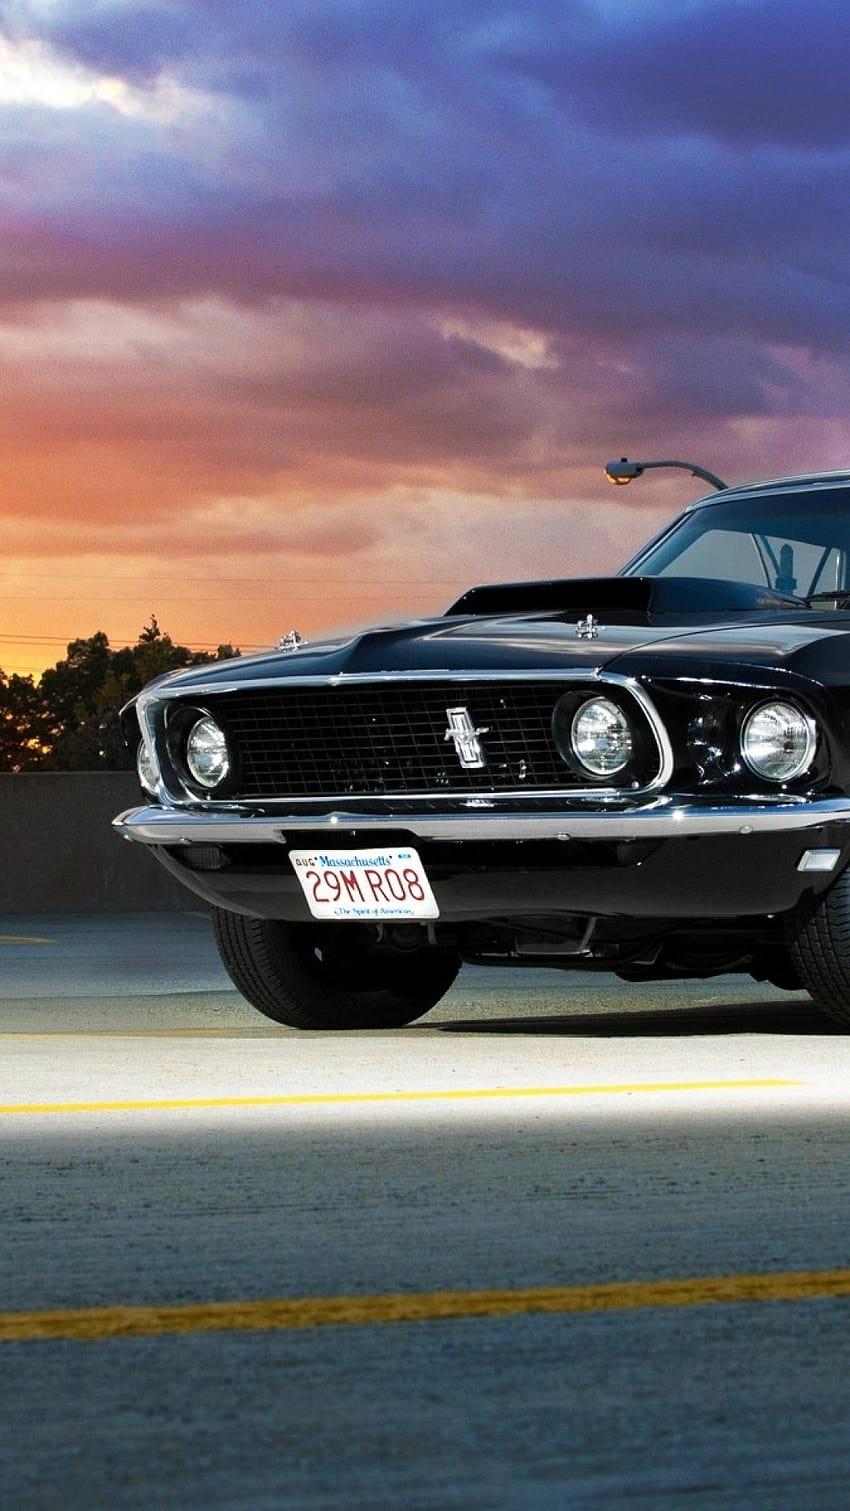 Download wallpaper 1280x2120 on road 1969 ford mustang boss 429 black  muscle car iphone 6 plus 1280x2120 hd background 9819